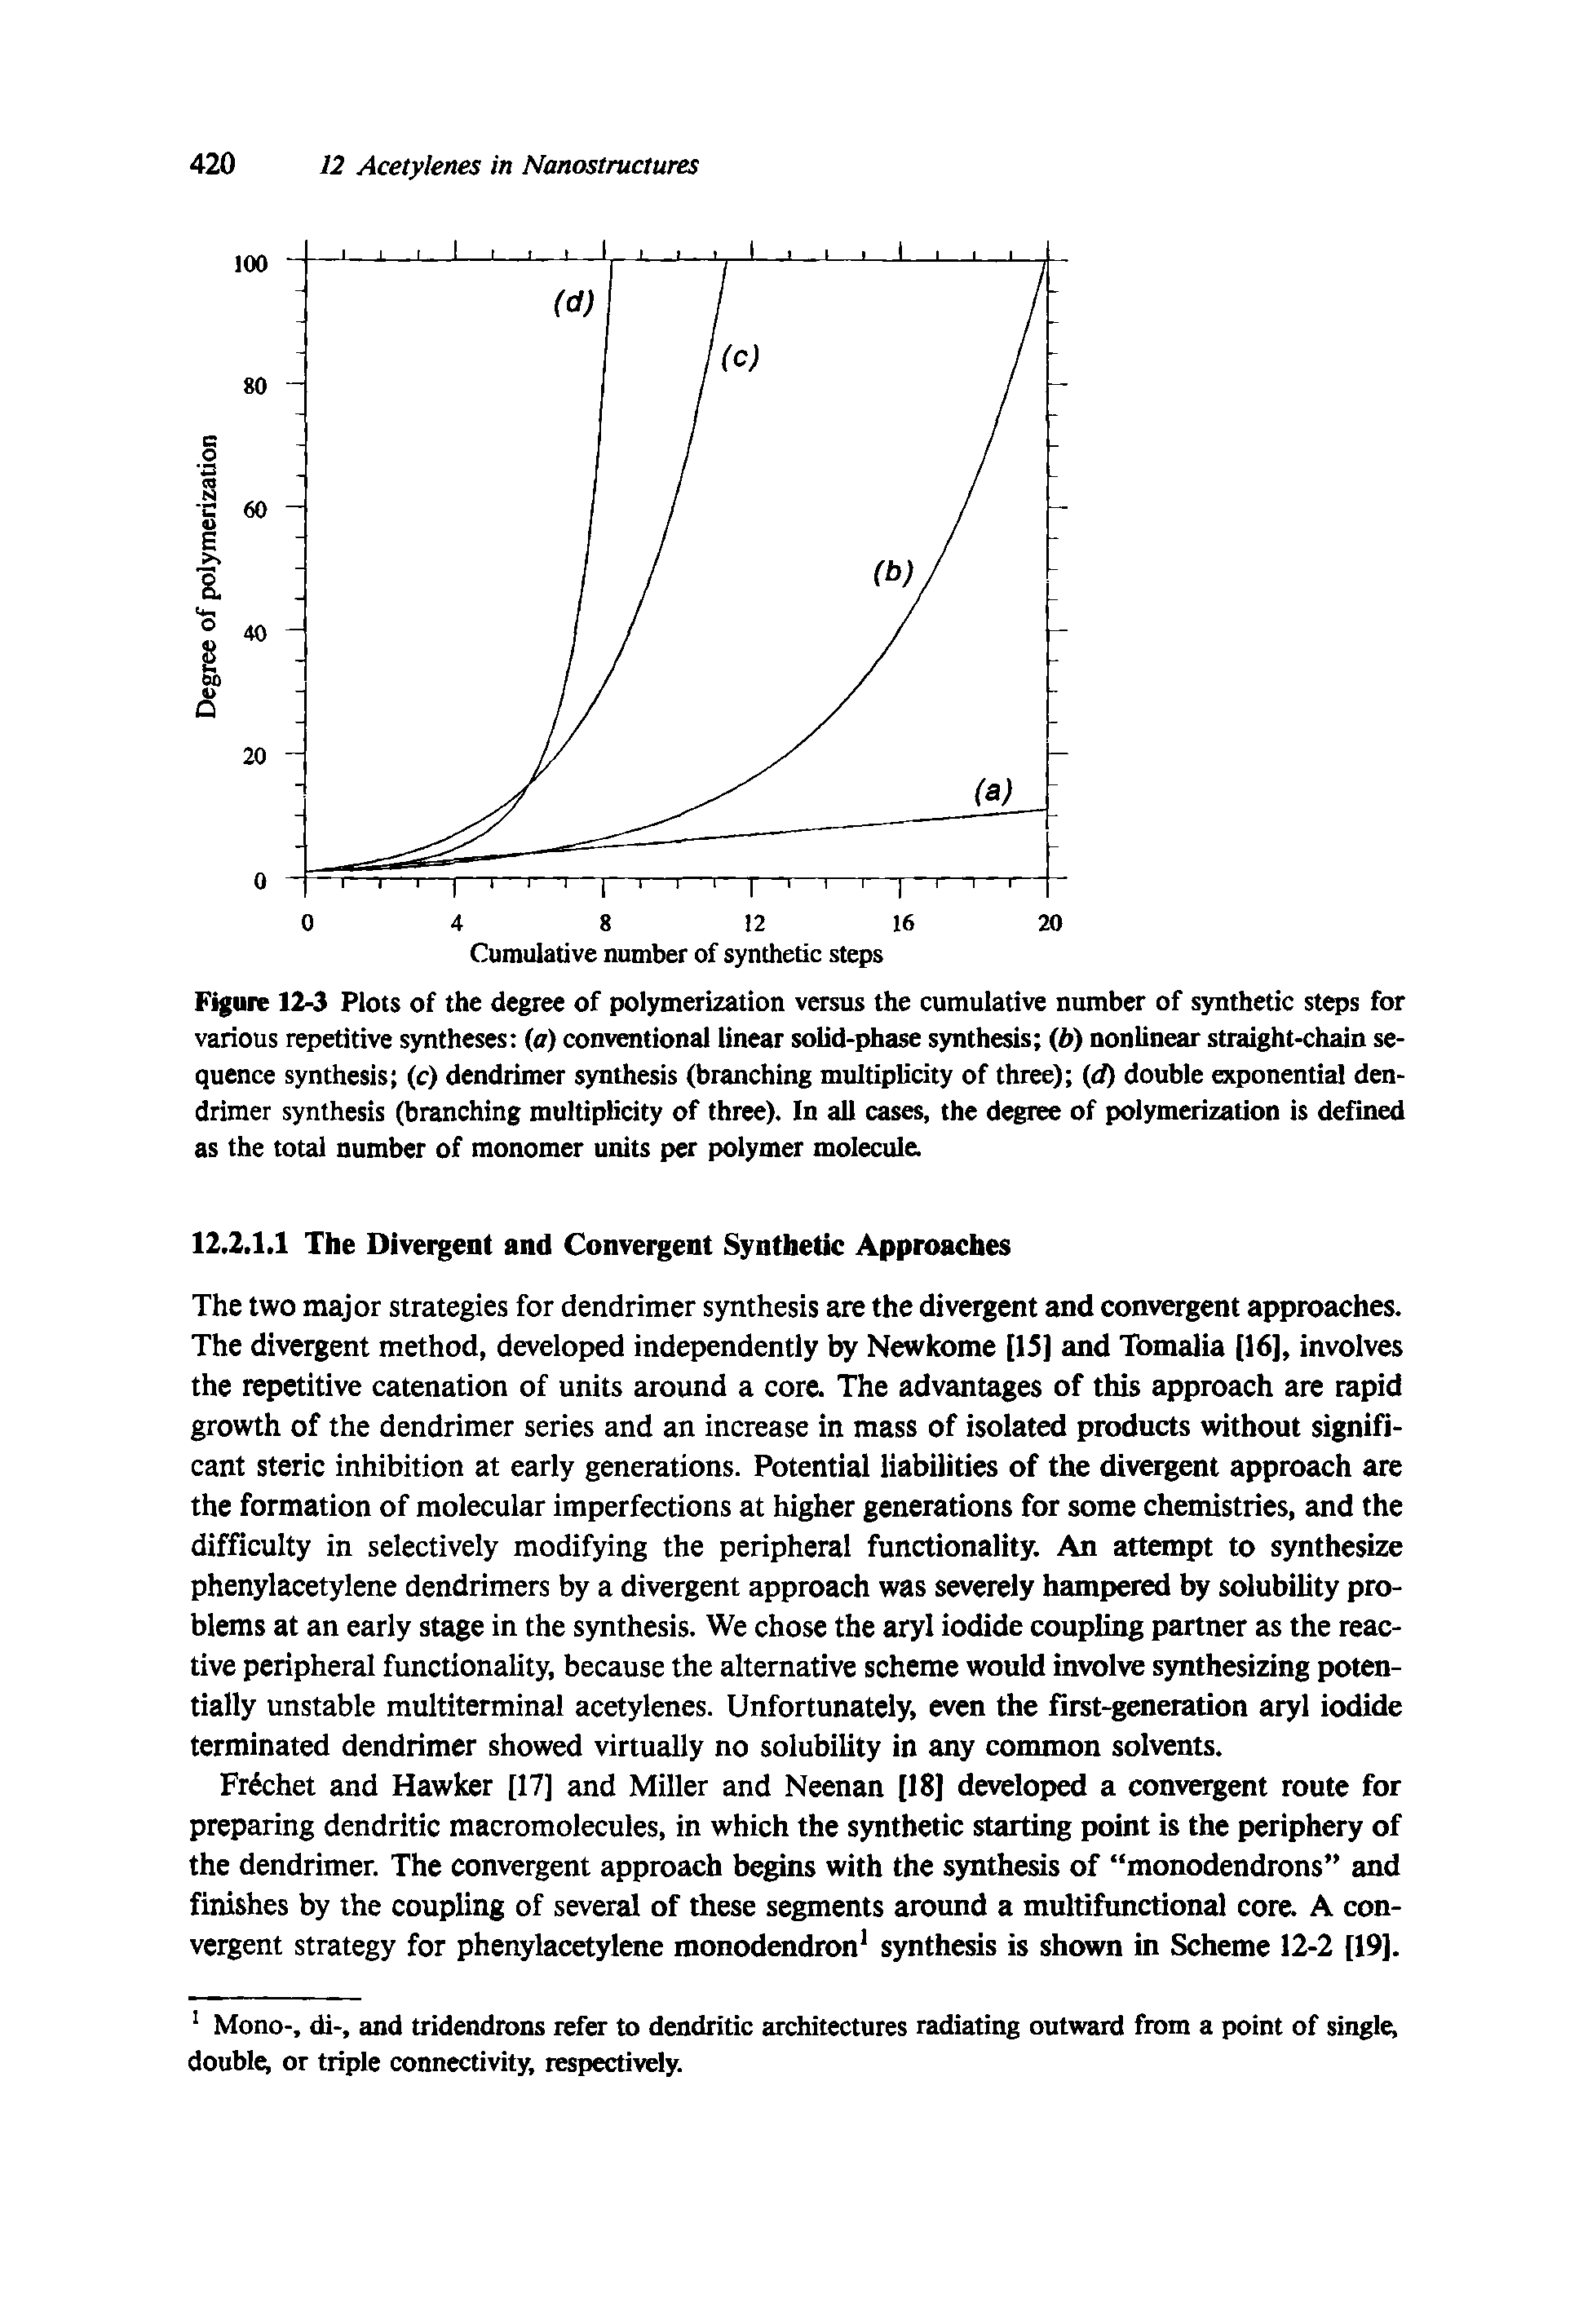 Figure 12-3 Plots of the degree of polymerization versus the cumulative number of synthetic steps for various repetitive syntheses (a) conventional linear solid-phase synthesis (b) nonlinear straight-chain sequence synthesis (c) dendrimer synthesis (branching multiplicity of three) (d) double exponential den-drimer synthesis (branching multiplicity of three). In all cases, the degree of polymerization is defined as the total number of monomer units per polymer molecule.